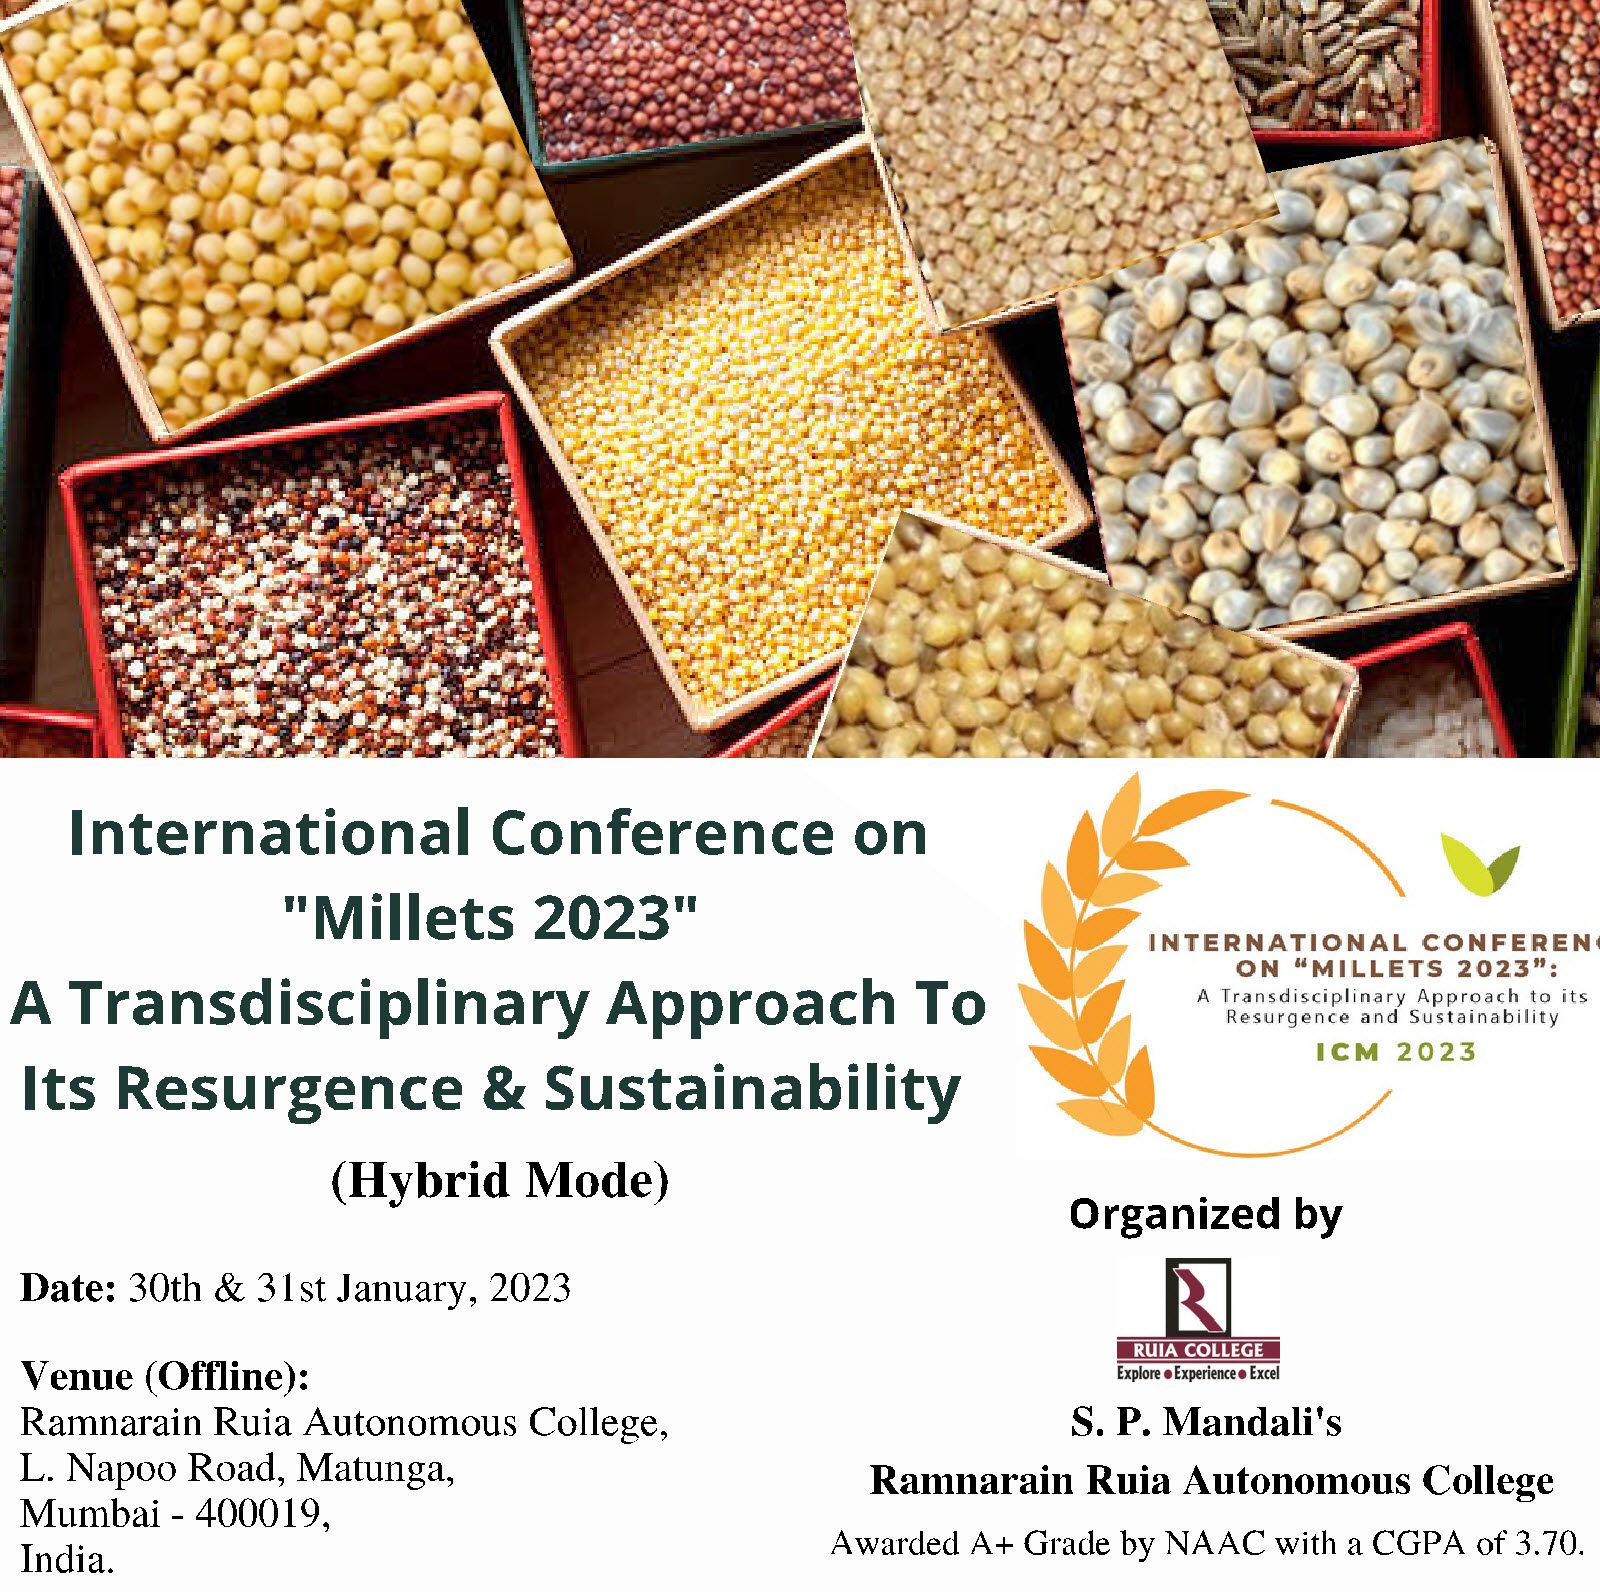 International Conference on "Millets 2023": A Transdisciplinary Approach to its Resurgence and Sustainability (ICM-2023)